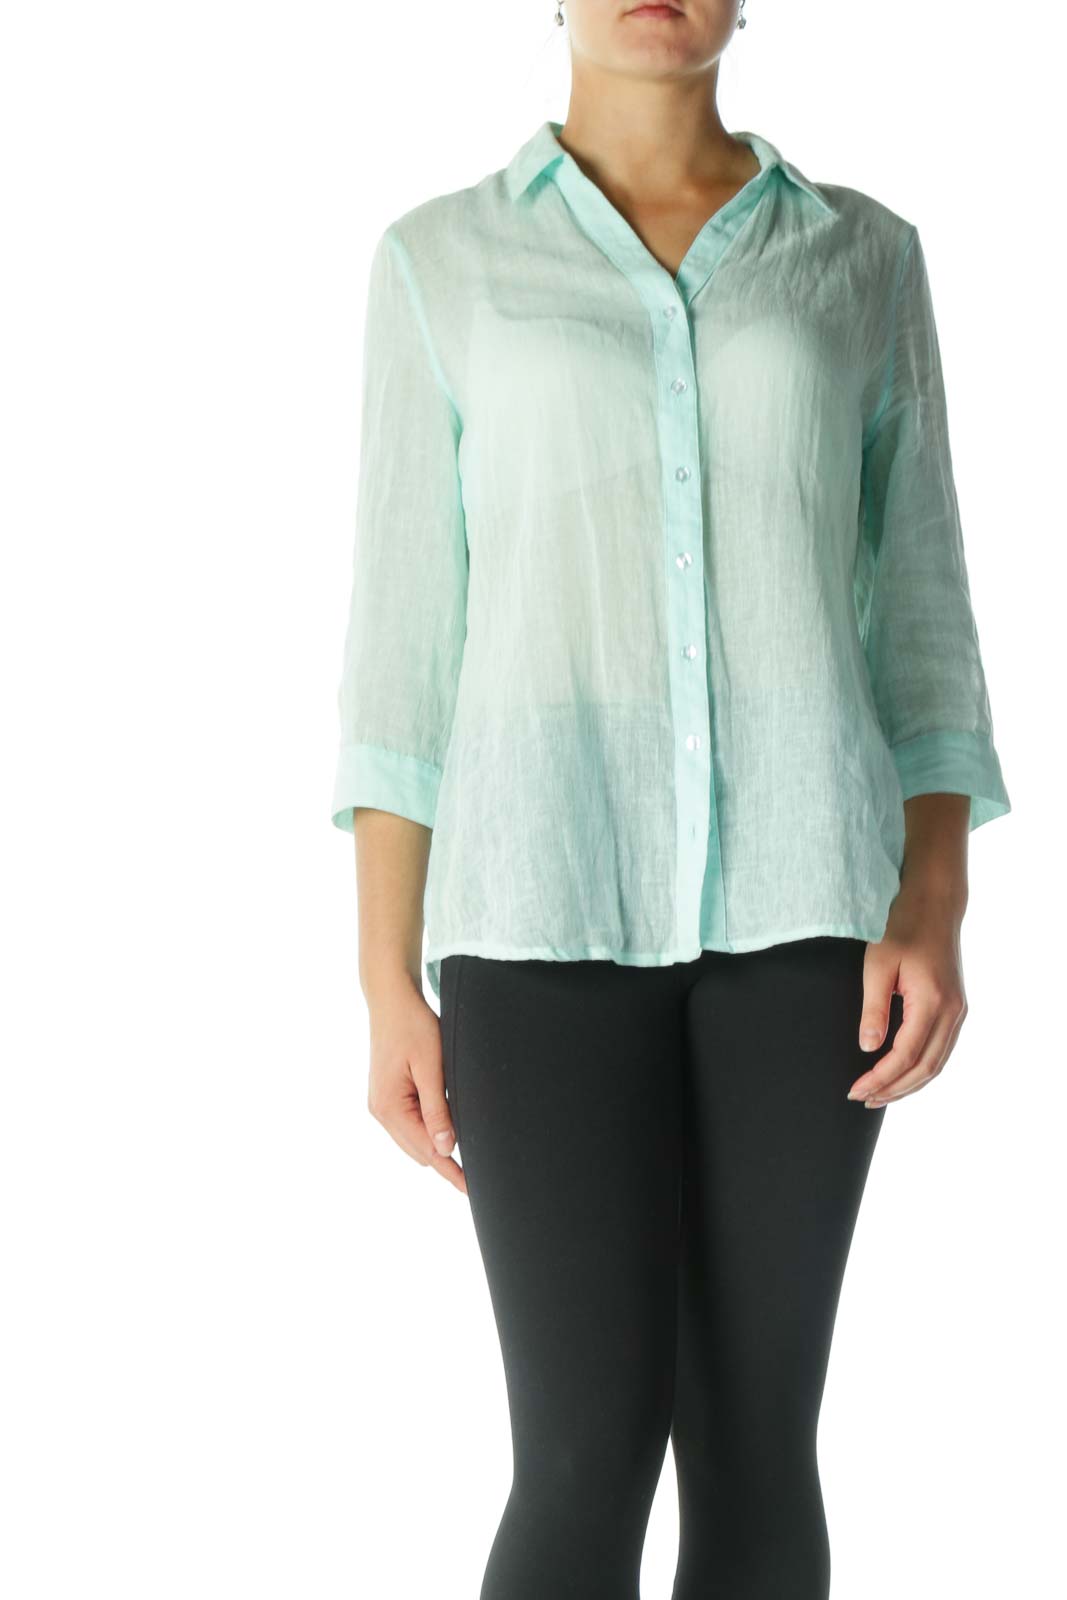 Mint See Through Button Down Shirt Front